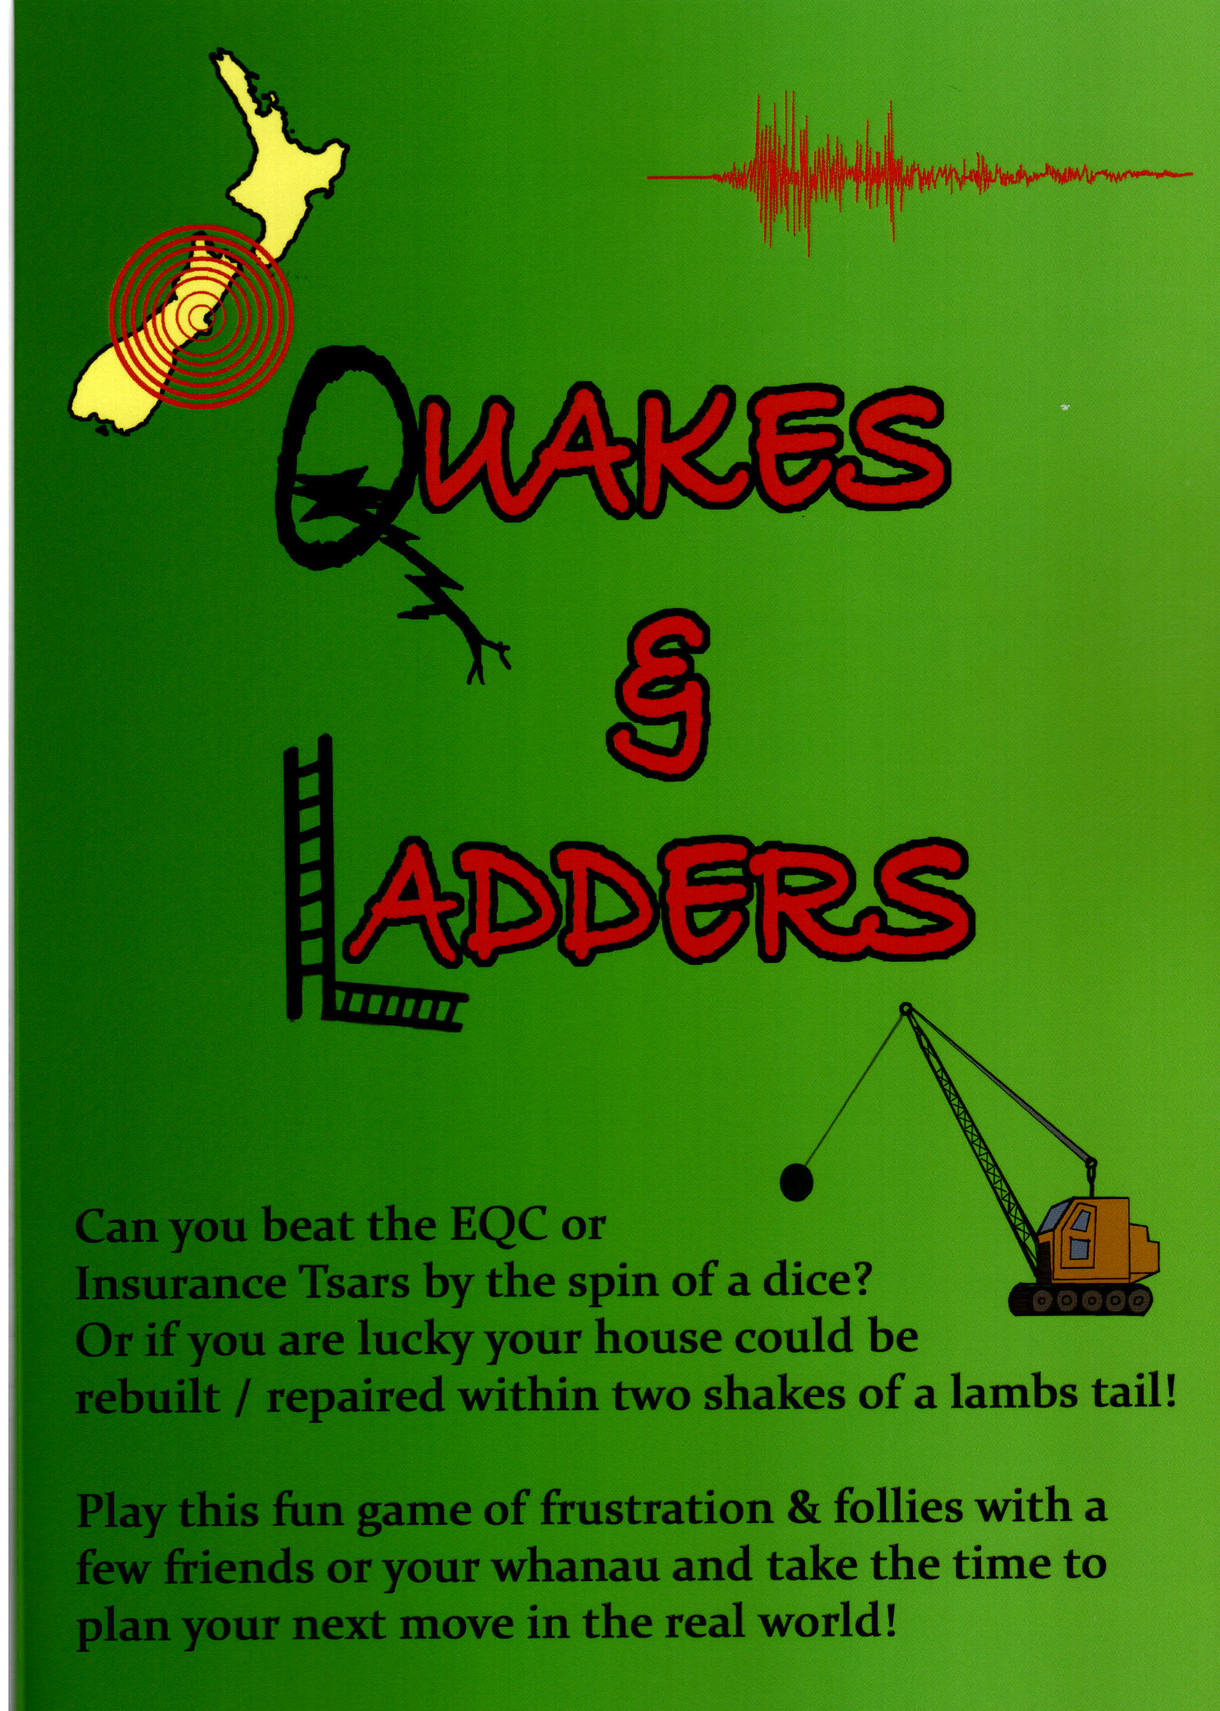 Quakes and Ladders Game